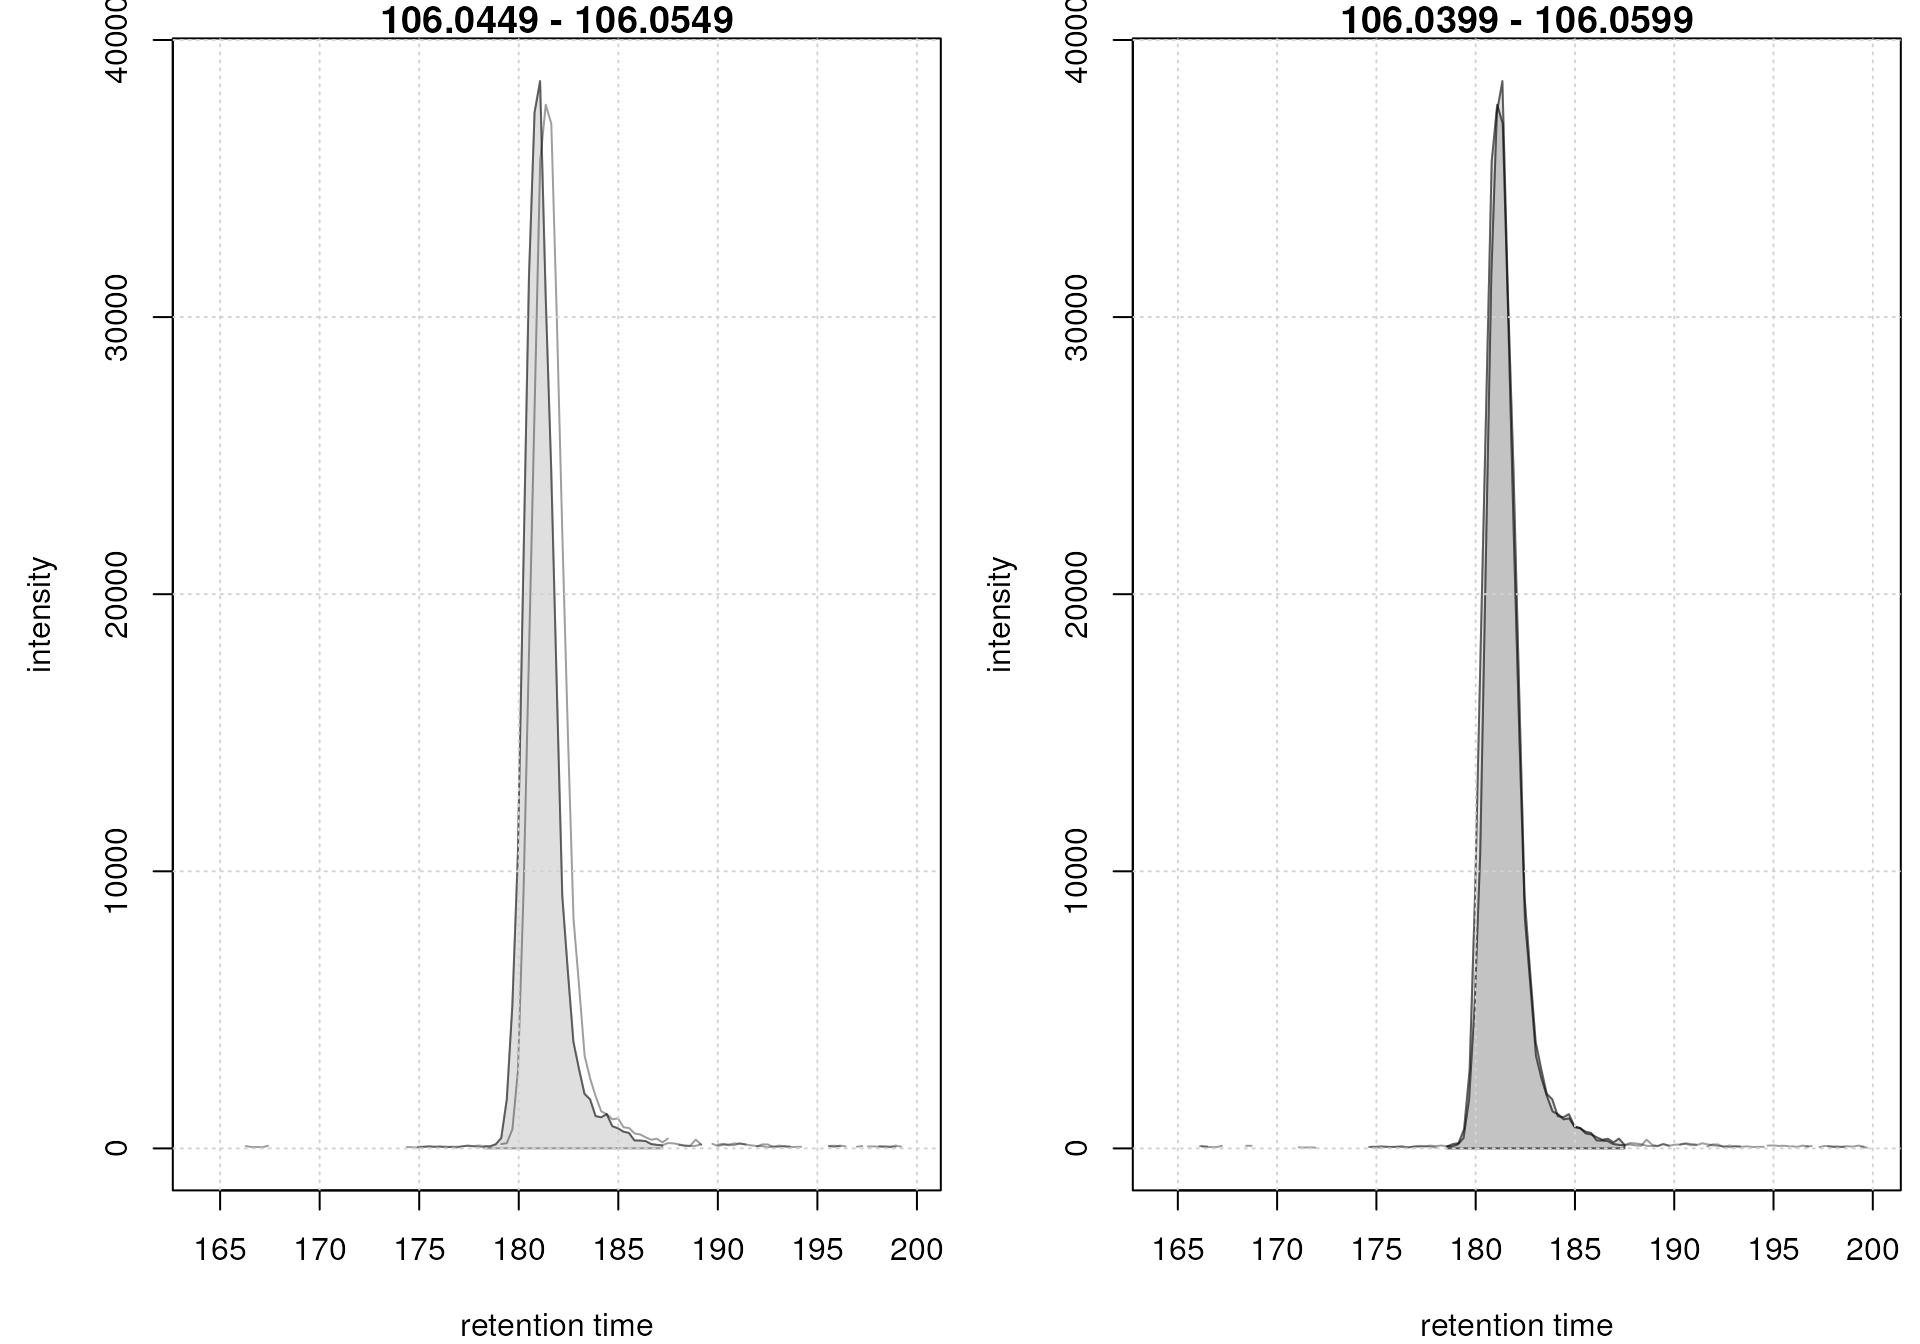 EIC for Serine before (left) and after (right) alignment